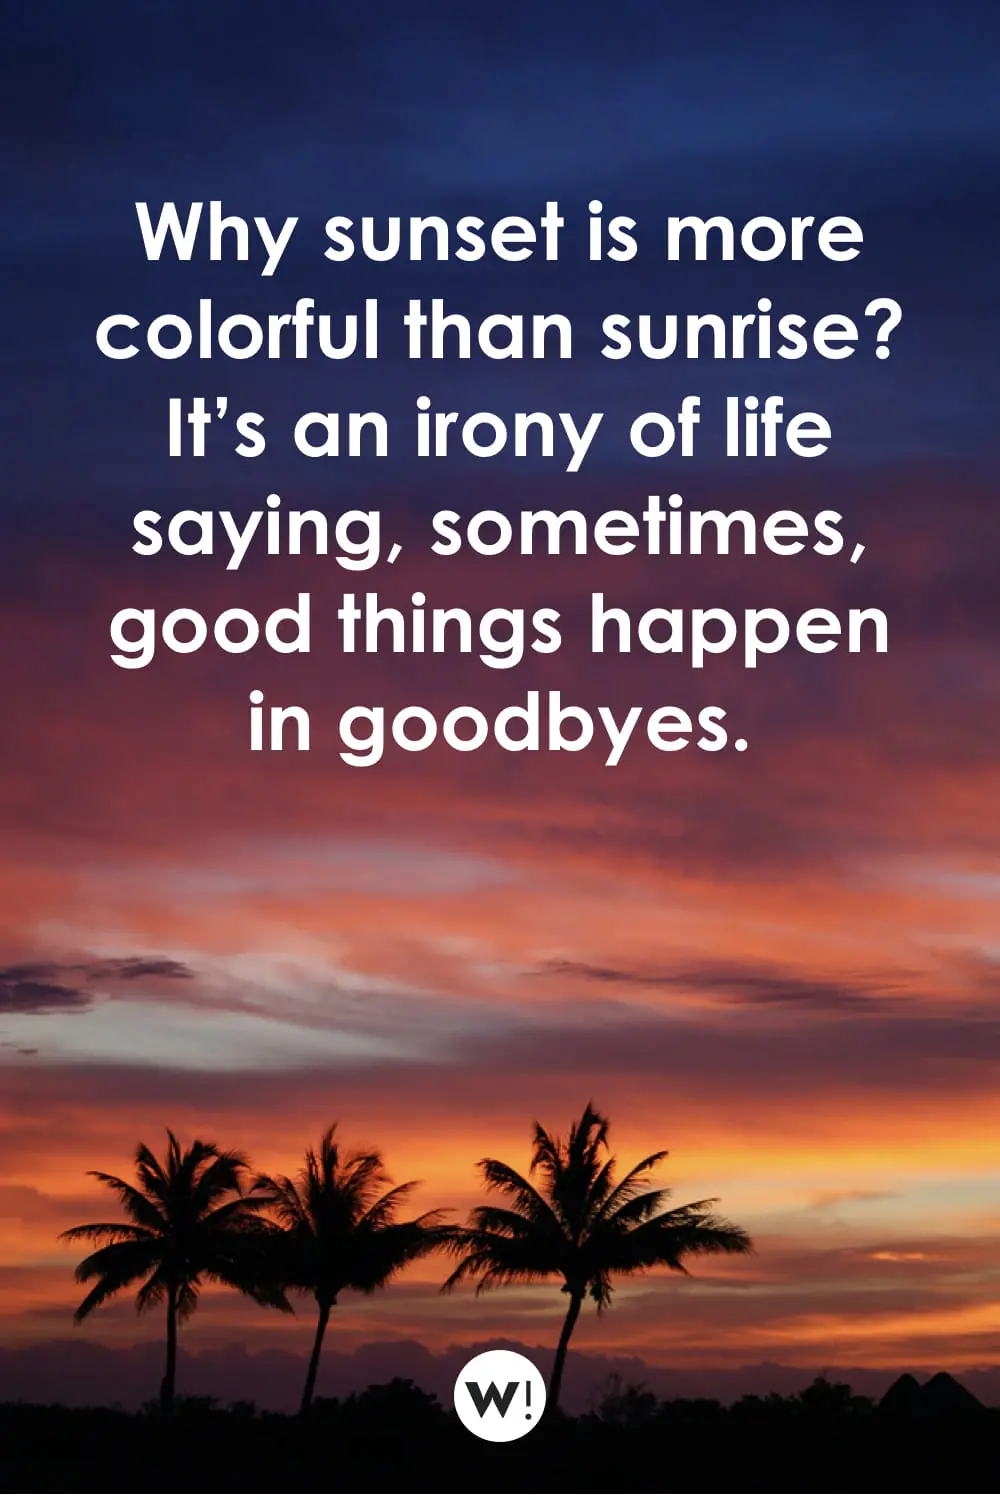 Sad Sunset Quotes Why Sunset Is More Colorful Than Sunrise